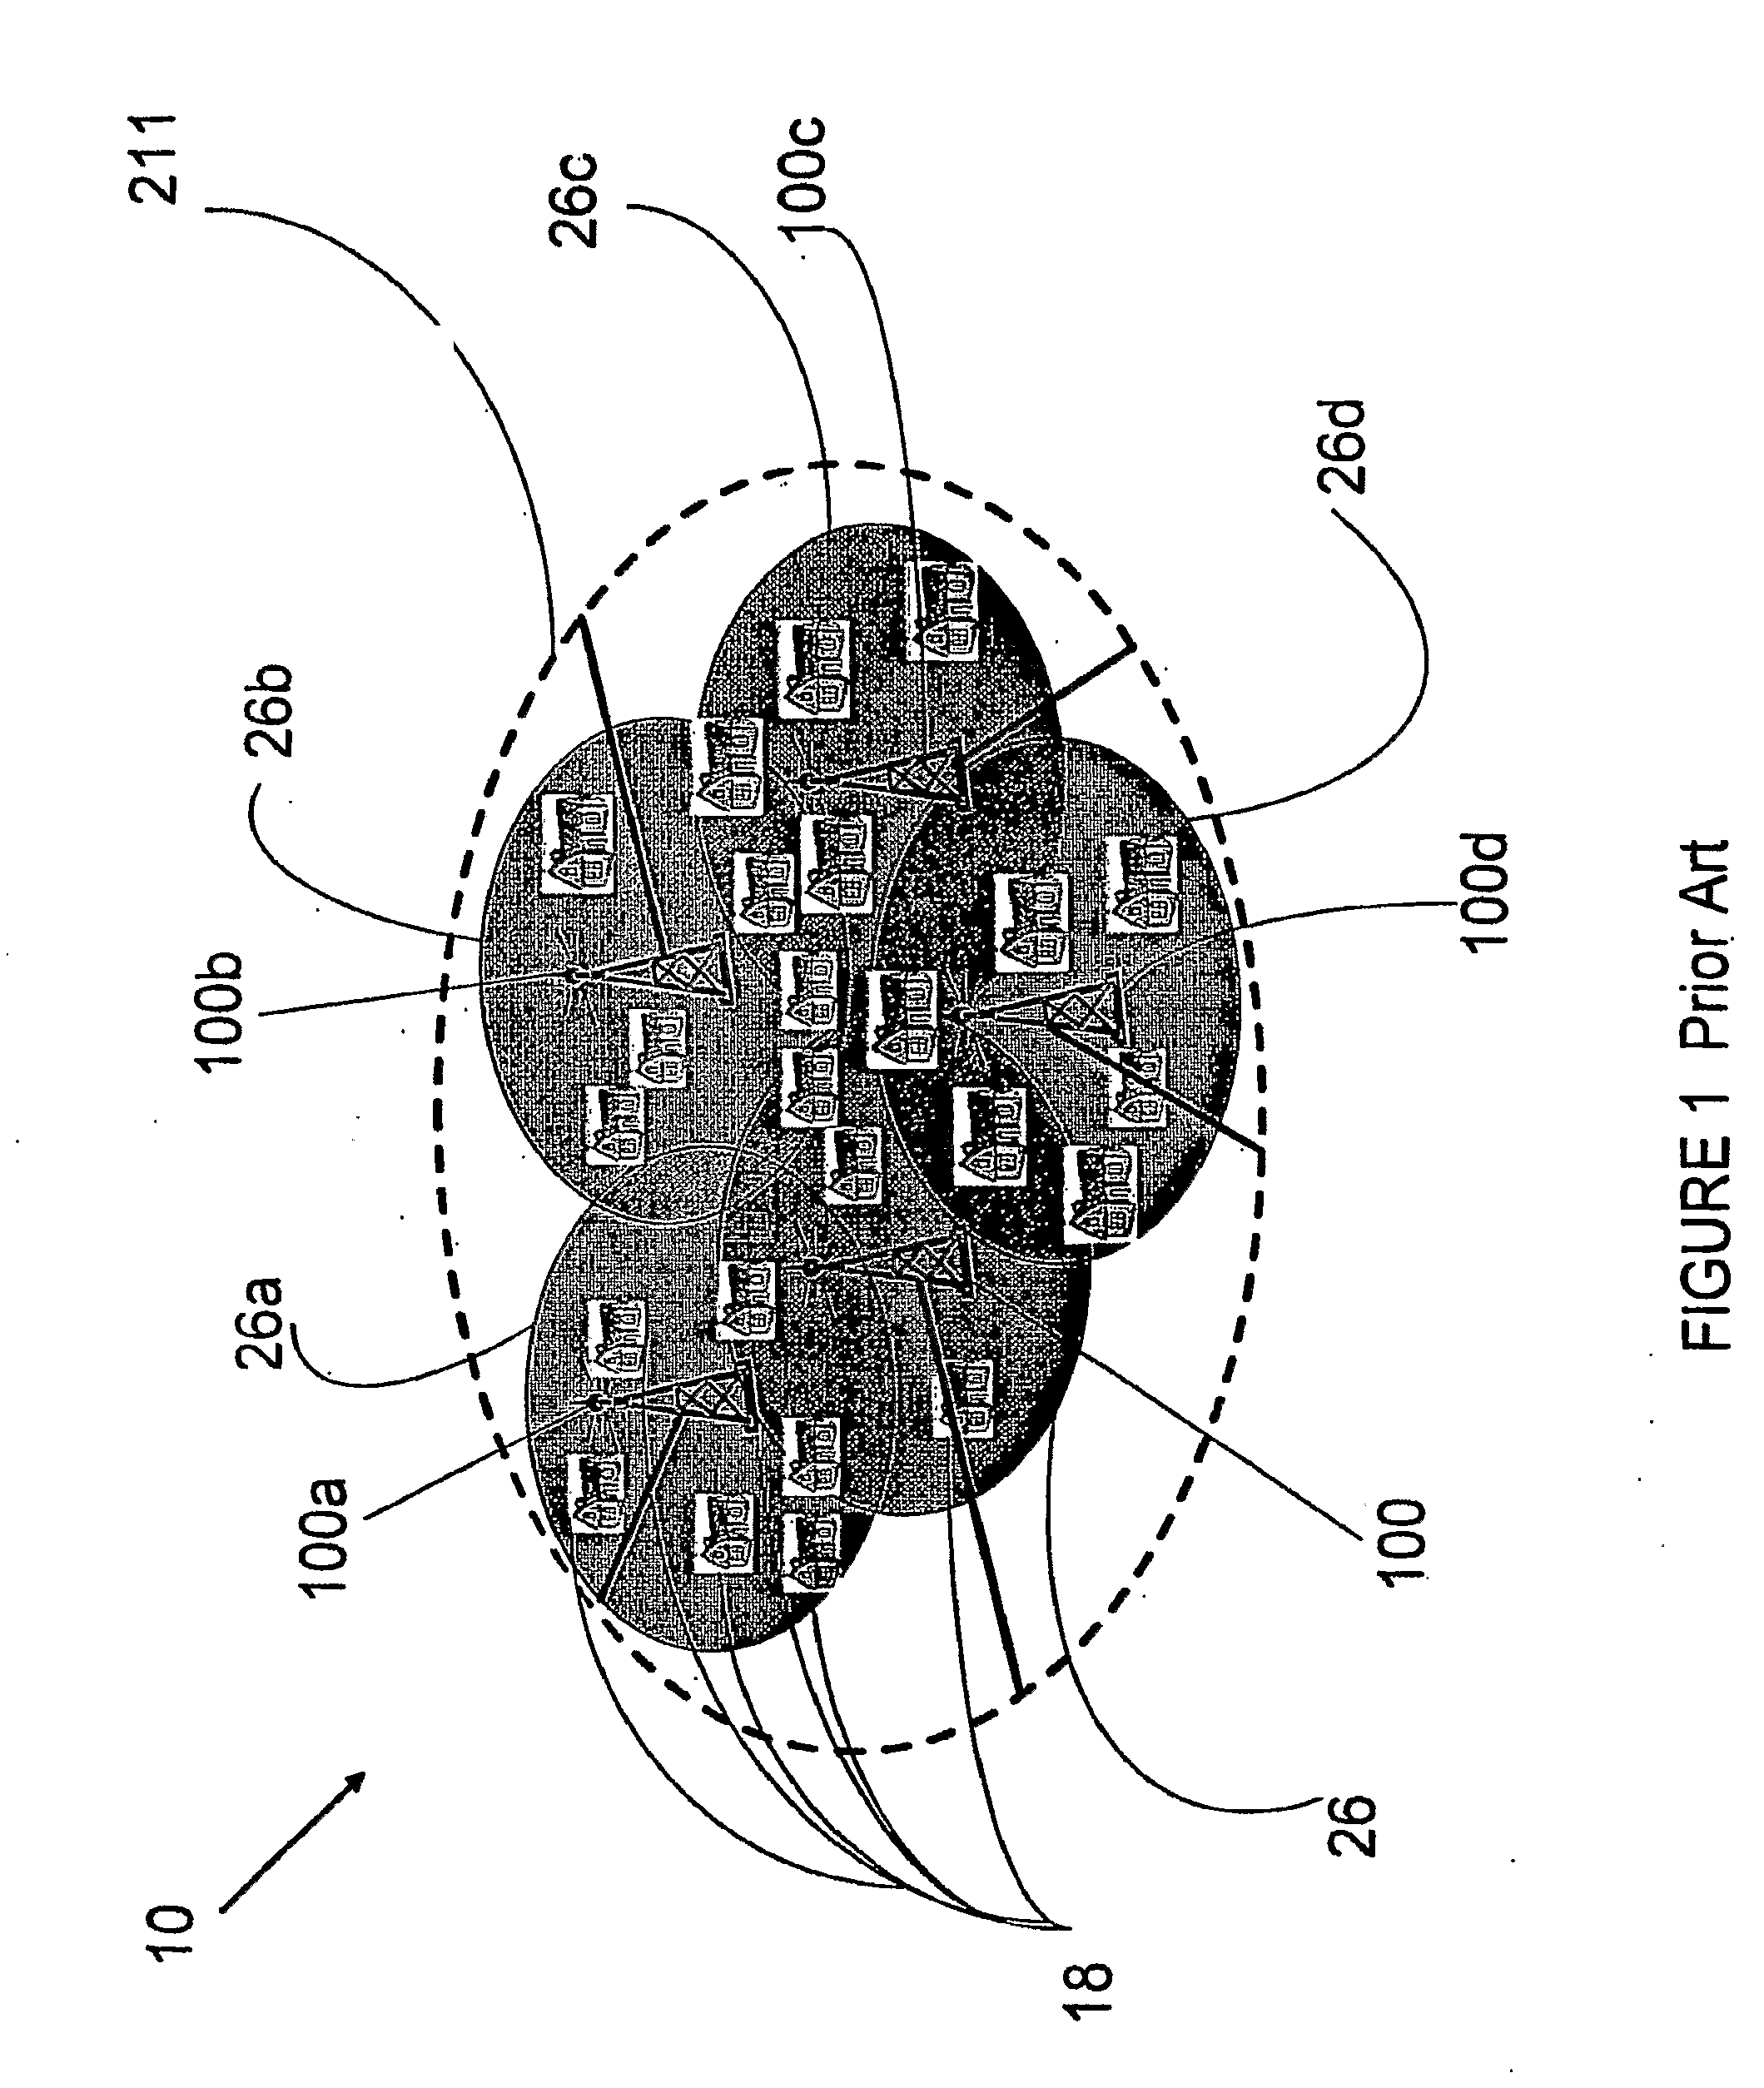 Apparatus and Method for Controlling Channel Switching in Wireless Networks